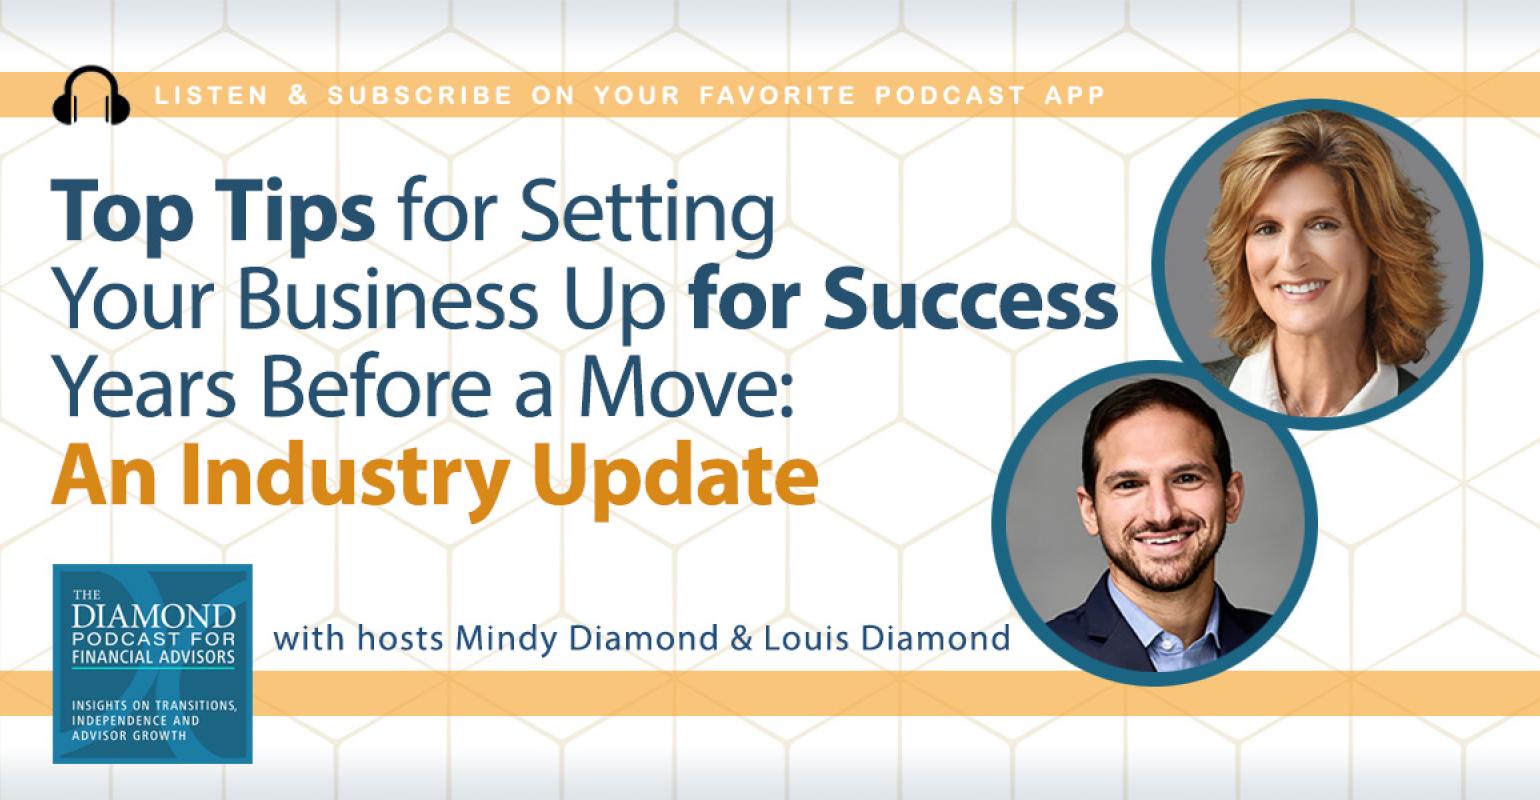 Diamond Podcast for financial advisors. Top tips for advisors before making a move